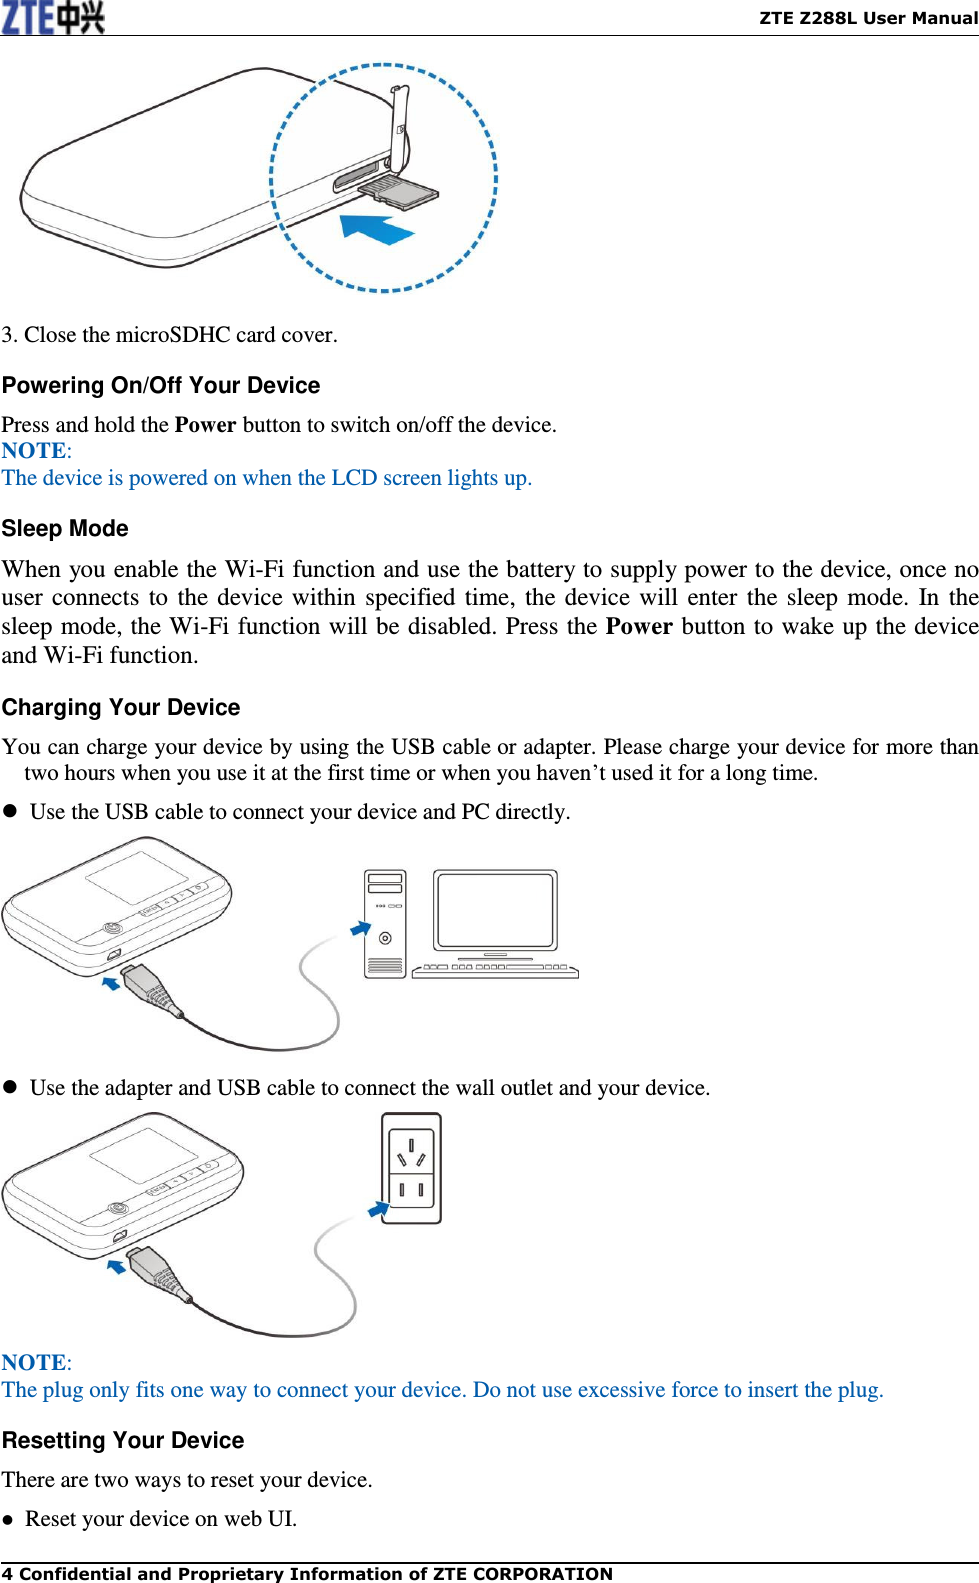    ZTE Z288L User Manual 4 Confidential and Proprietary Information of ZTE CORPORATION   3. Close the microSDHC card cover. Powering On/Off Your Device Press and hold the Power button to switch on/off the device. NOTE:   The device is powered on when the LCD screen lights up.   Sleep Mode When you enable the Wi-Fi function and use the battery to supply power to the device, once no user connects to the device within specified time, the device will enter the sleep mode. In the sleep mode, the Wi-Fi function will be disabled. Press the Power button to wake up the device and Wi-Fi function. Charging Your Device You can charge your device by using the USB cable or adapter. Please charge your device for more than two hours when you use it at the first time or when you haven’t used it for a long time.   Use the USB cable to connect your device and PC directly.    Use the adapter and USB cable to connect the wall outlet and your device.  NOTE:   The plug only fits one way to connect your device. Do not use excessive force to insert the plug.   Resetting Your Device There are two ways to reset your device.   Reset your device on web UI. 